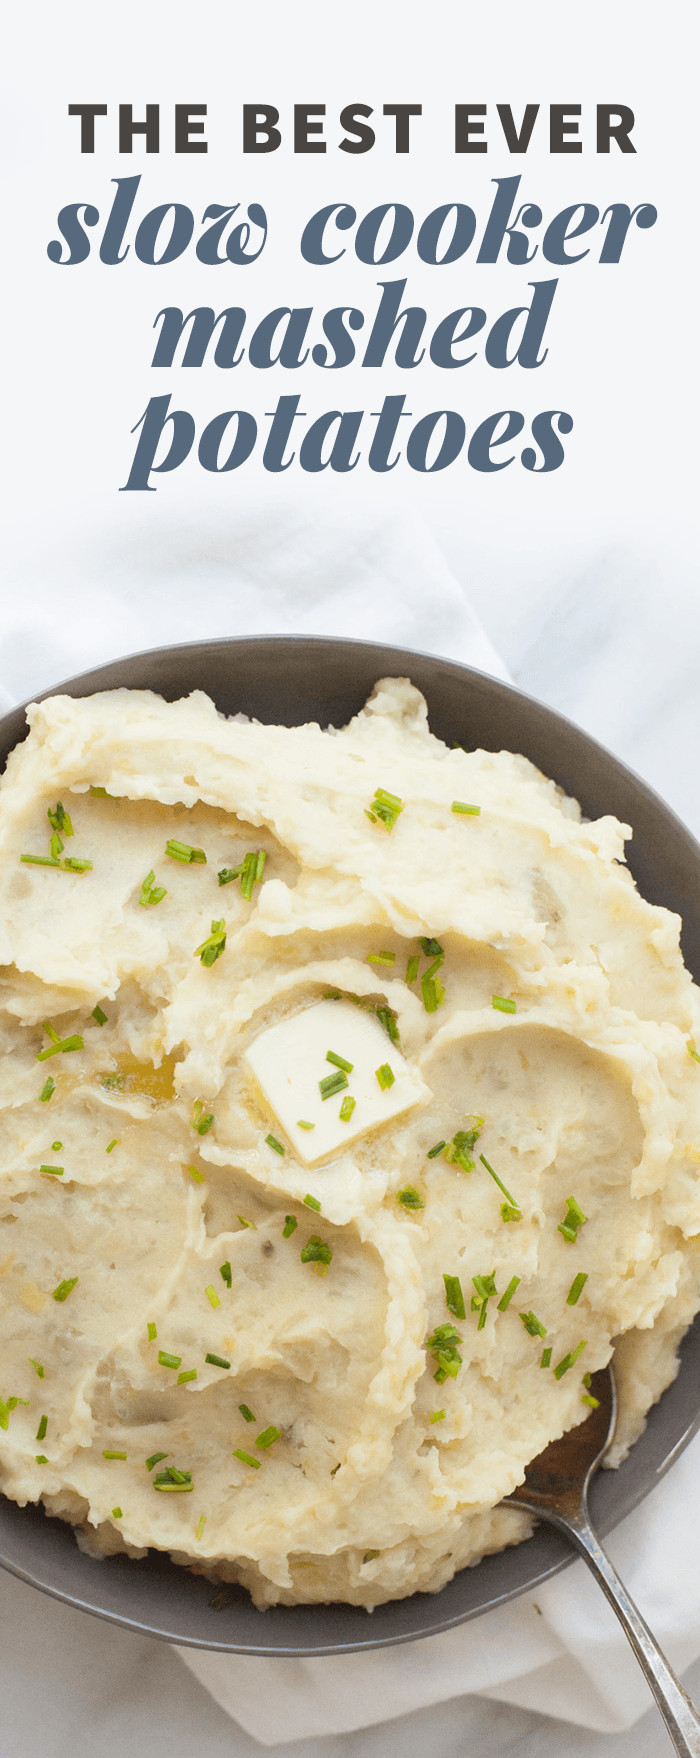 Best Thanksgiving Mashed Potatoes
 The Best Ever Slow Cooker Mashed Potatoes Wholefully